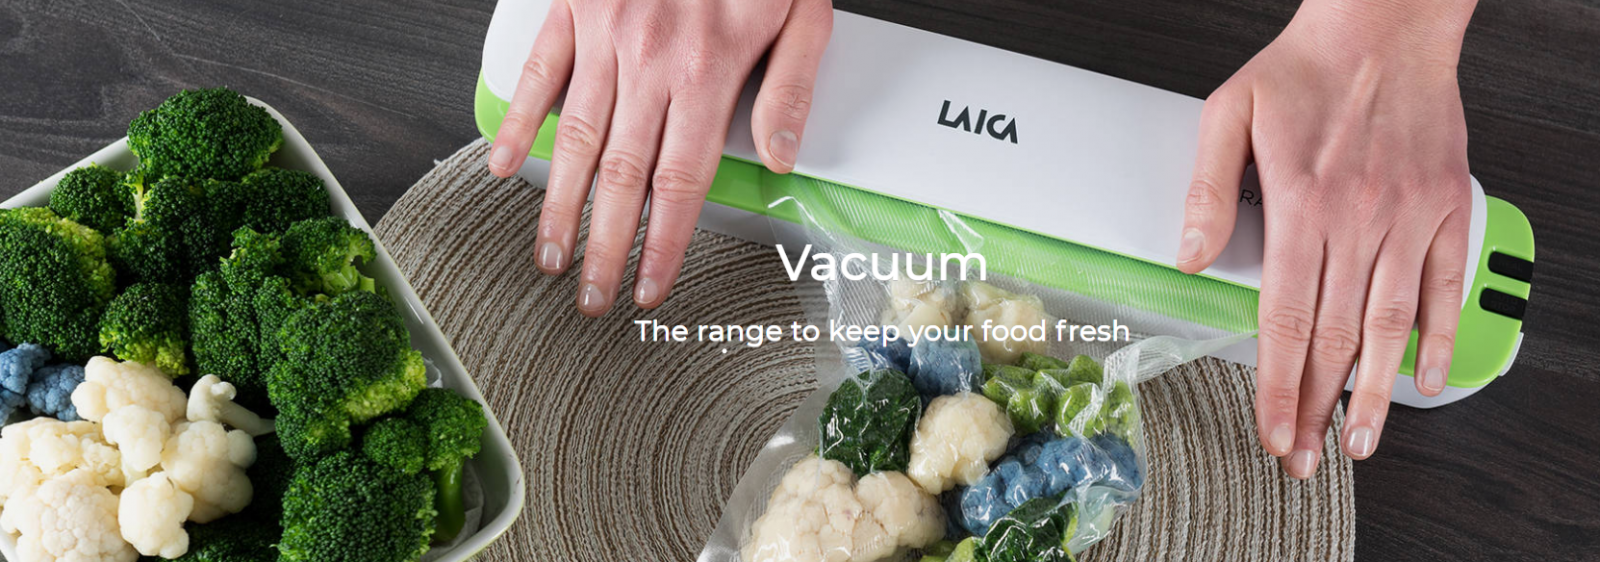 image of the Laica Vacuum Bags What is Vacuum Packing